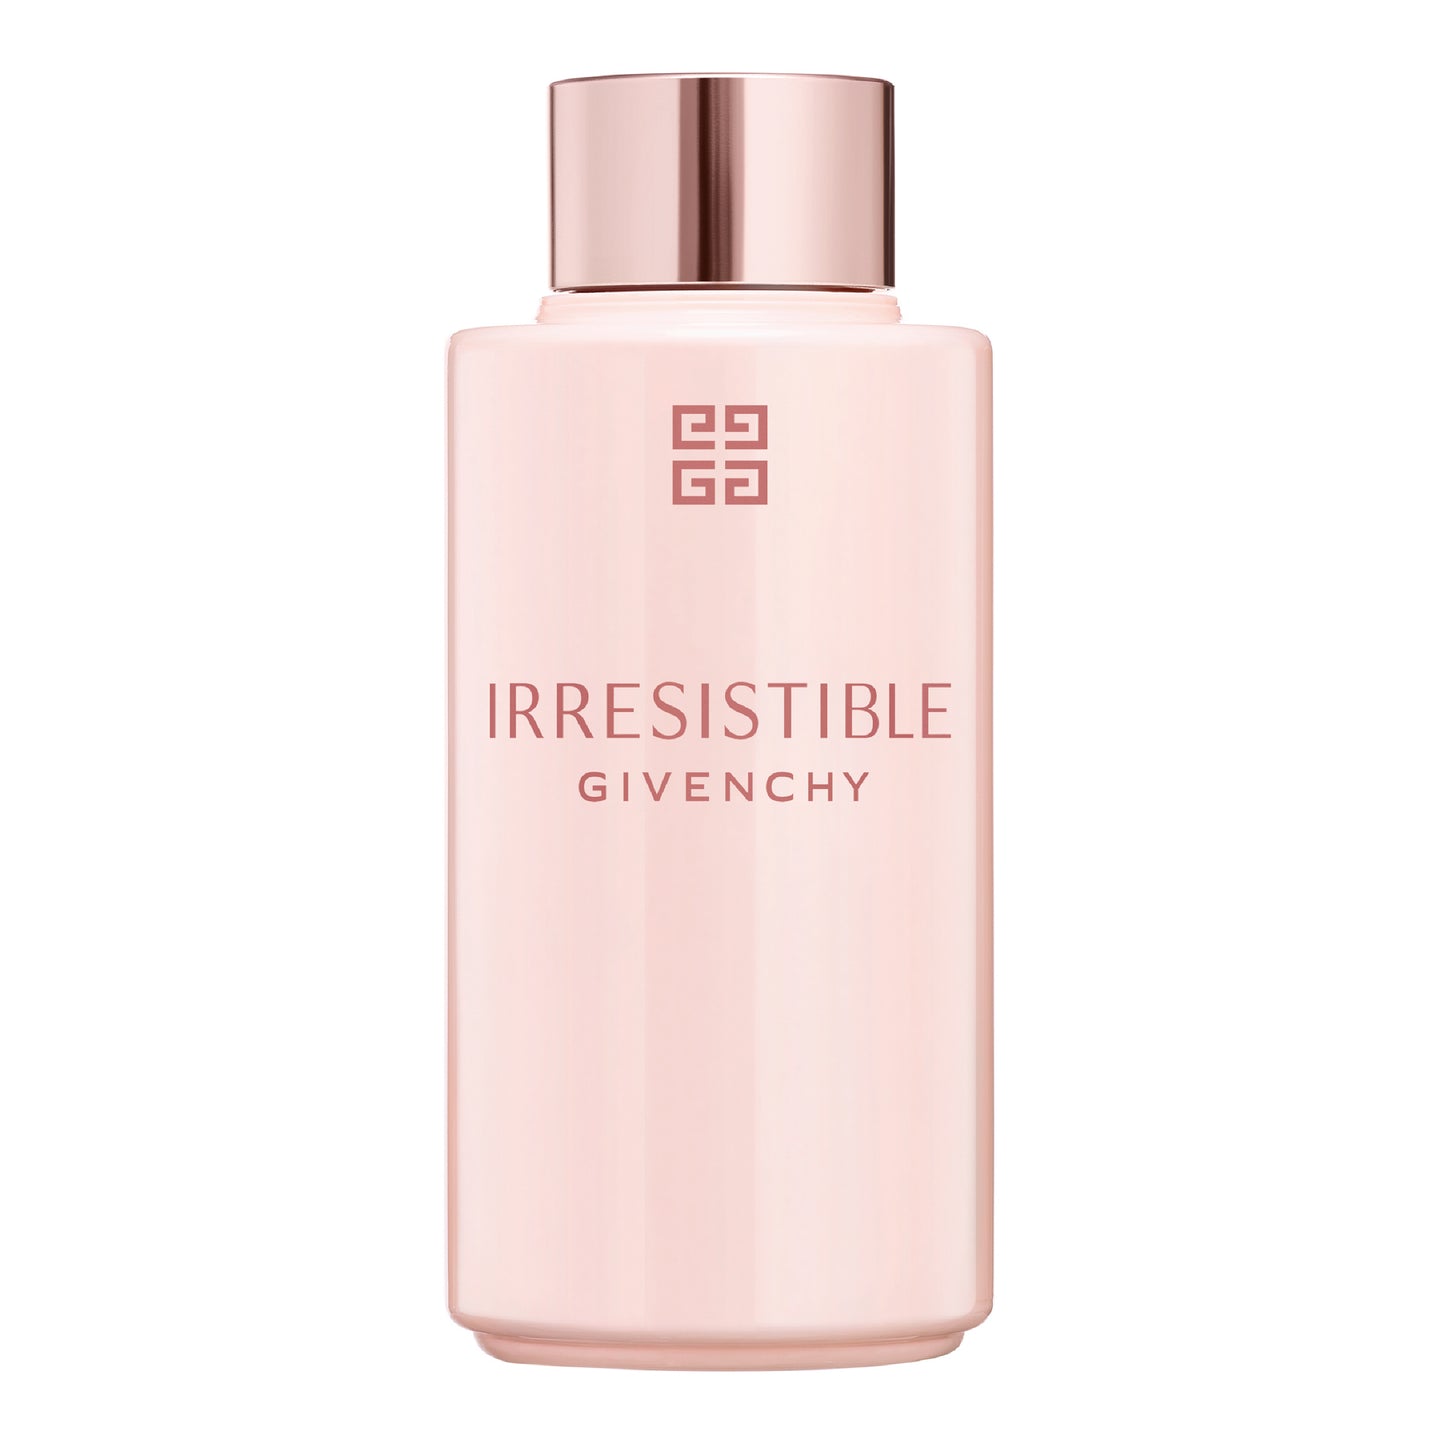 Irresistible Body Lotion